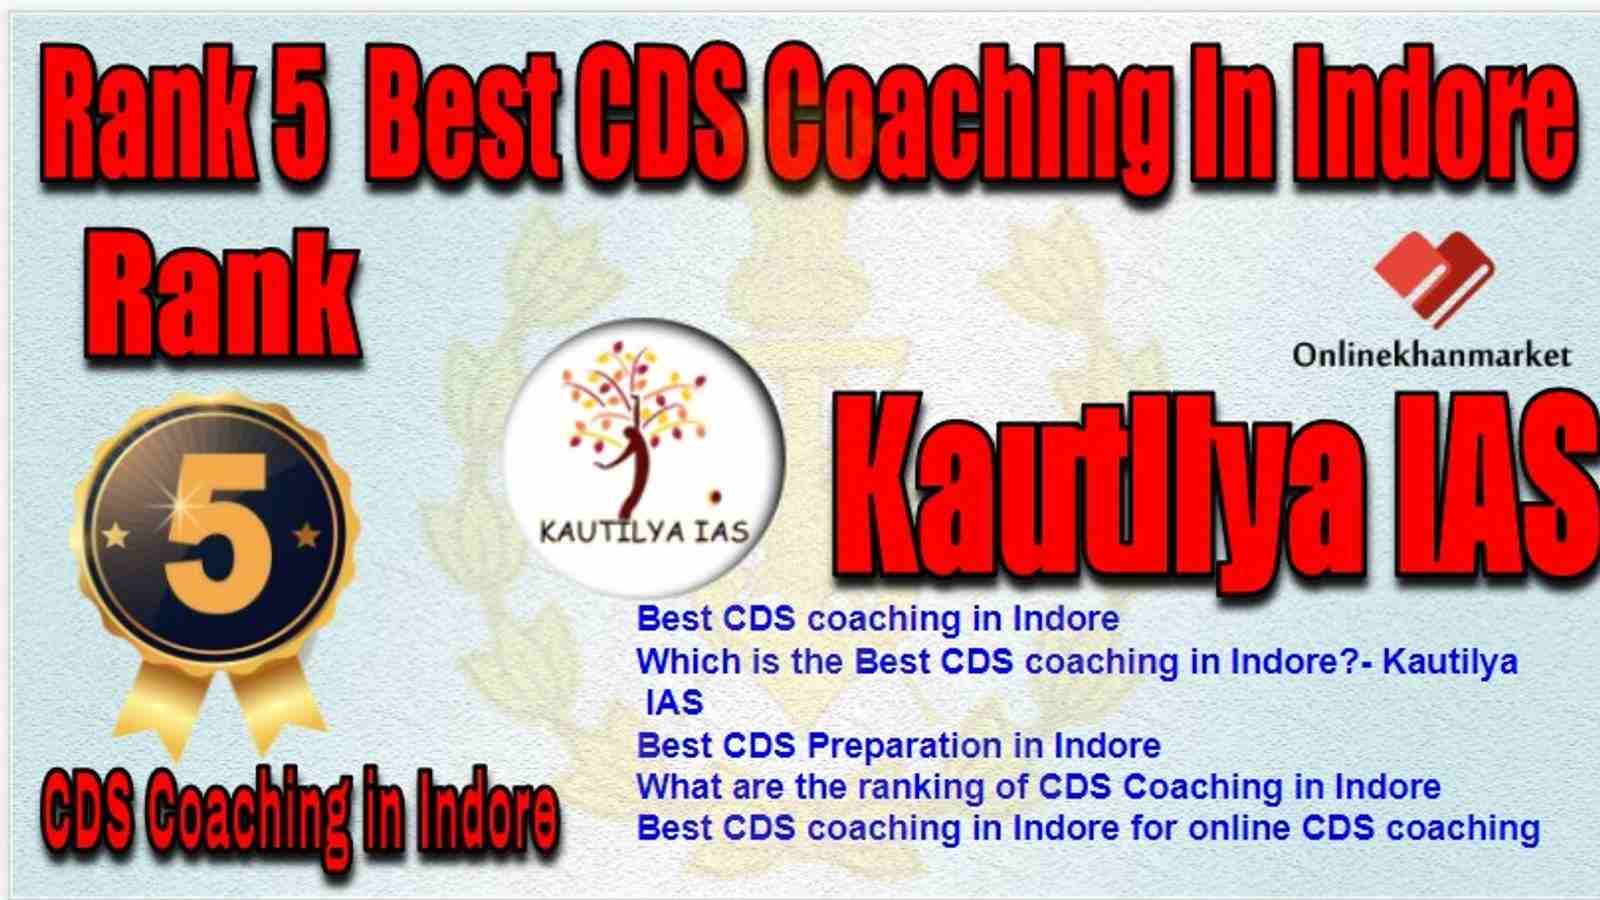 Rank 5 Best CDS Coaching in indore